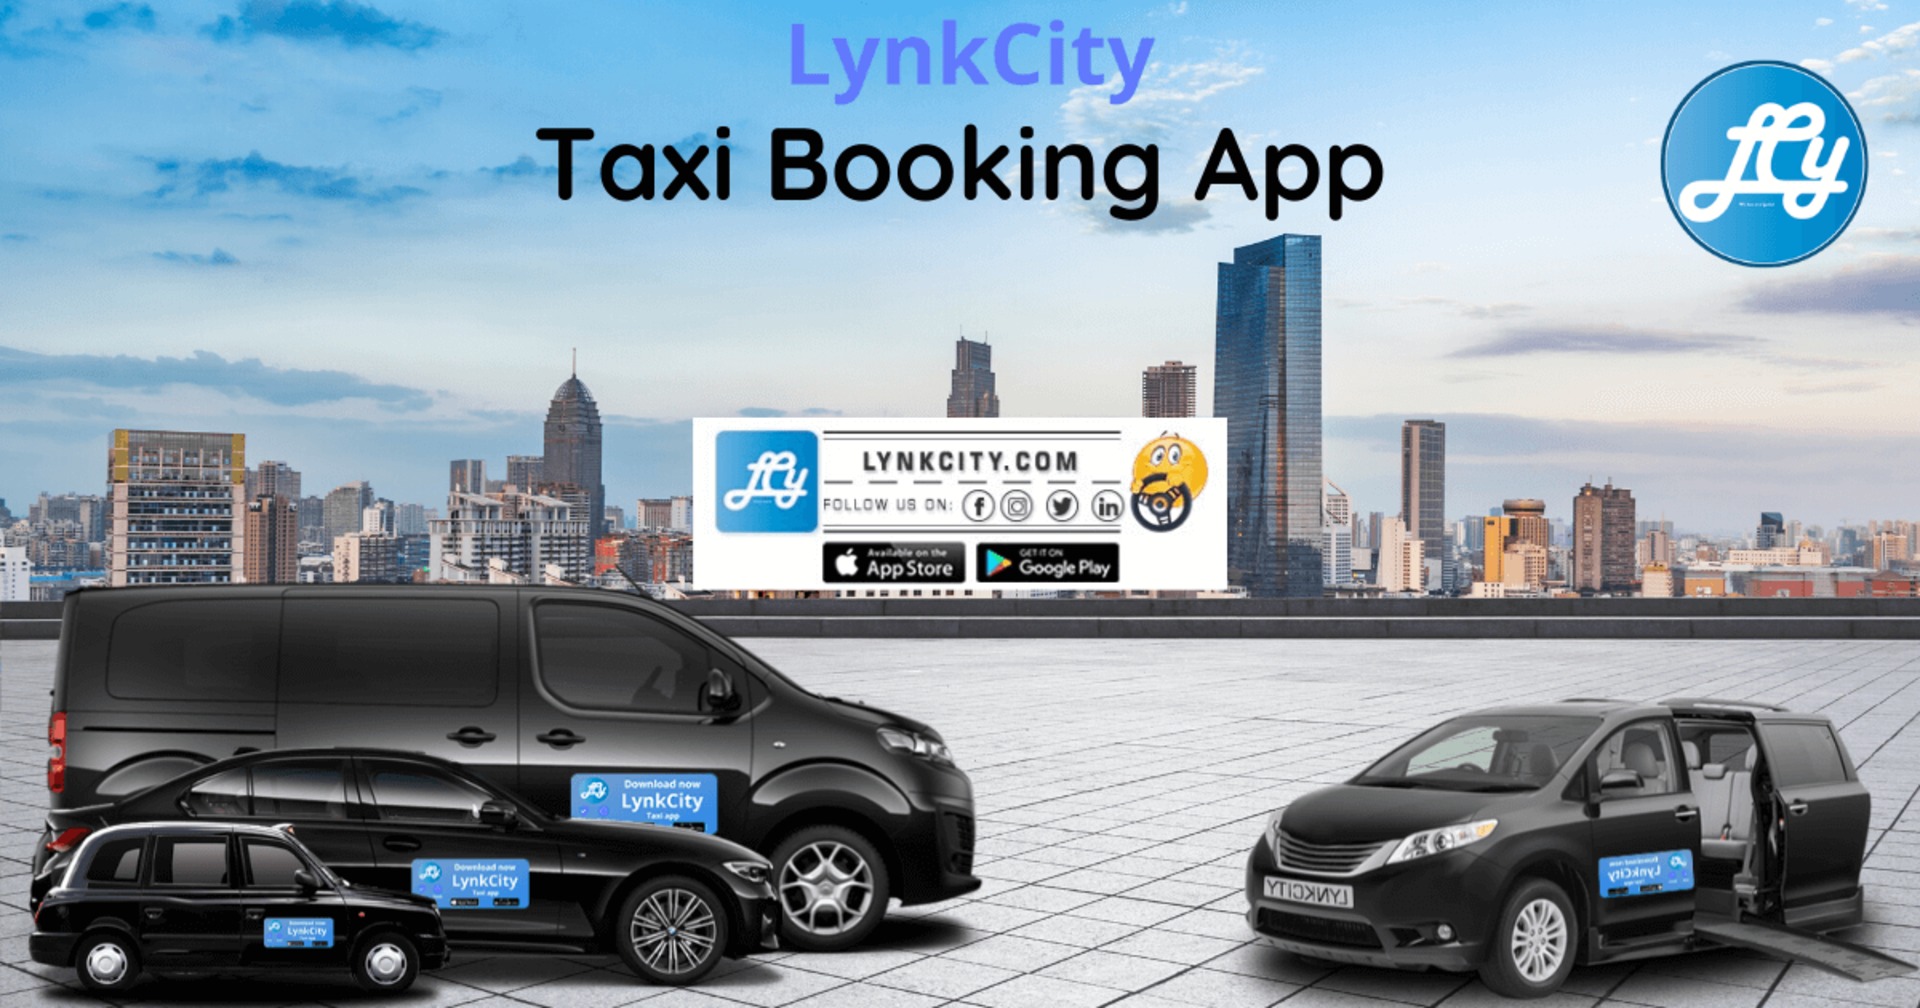 LynkCity Taxi Services Areas image